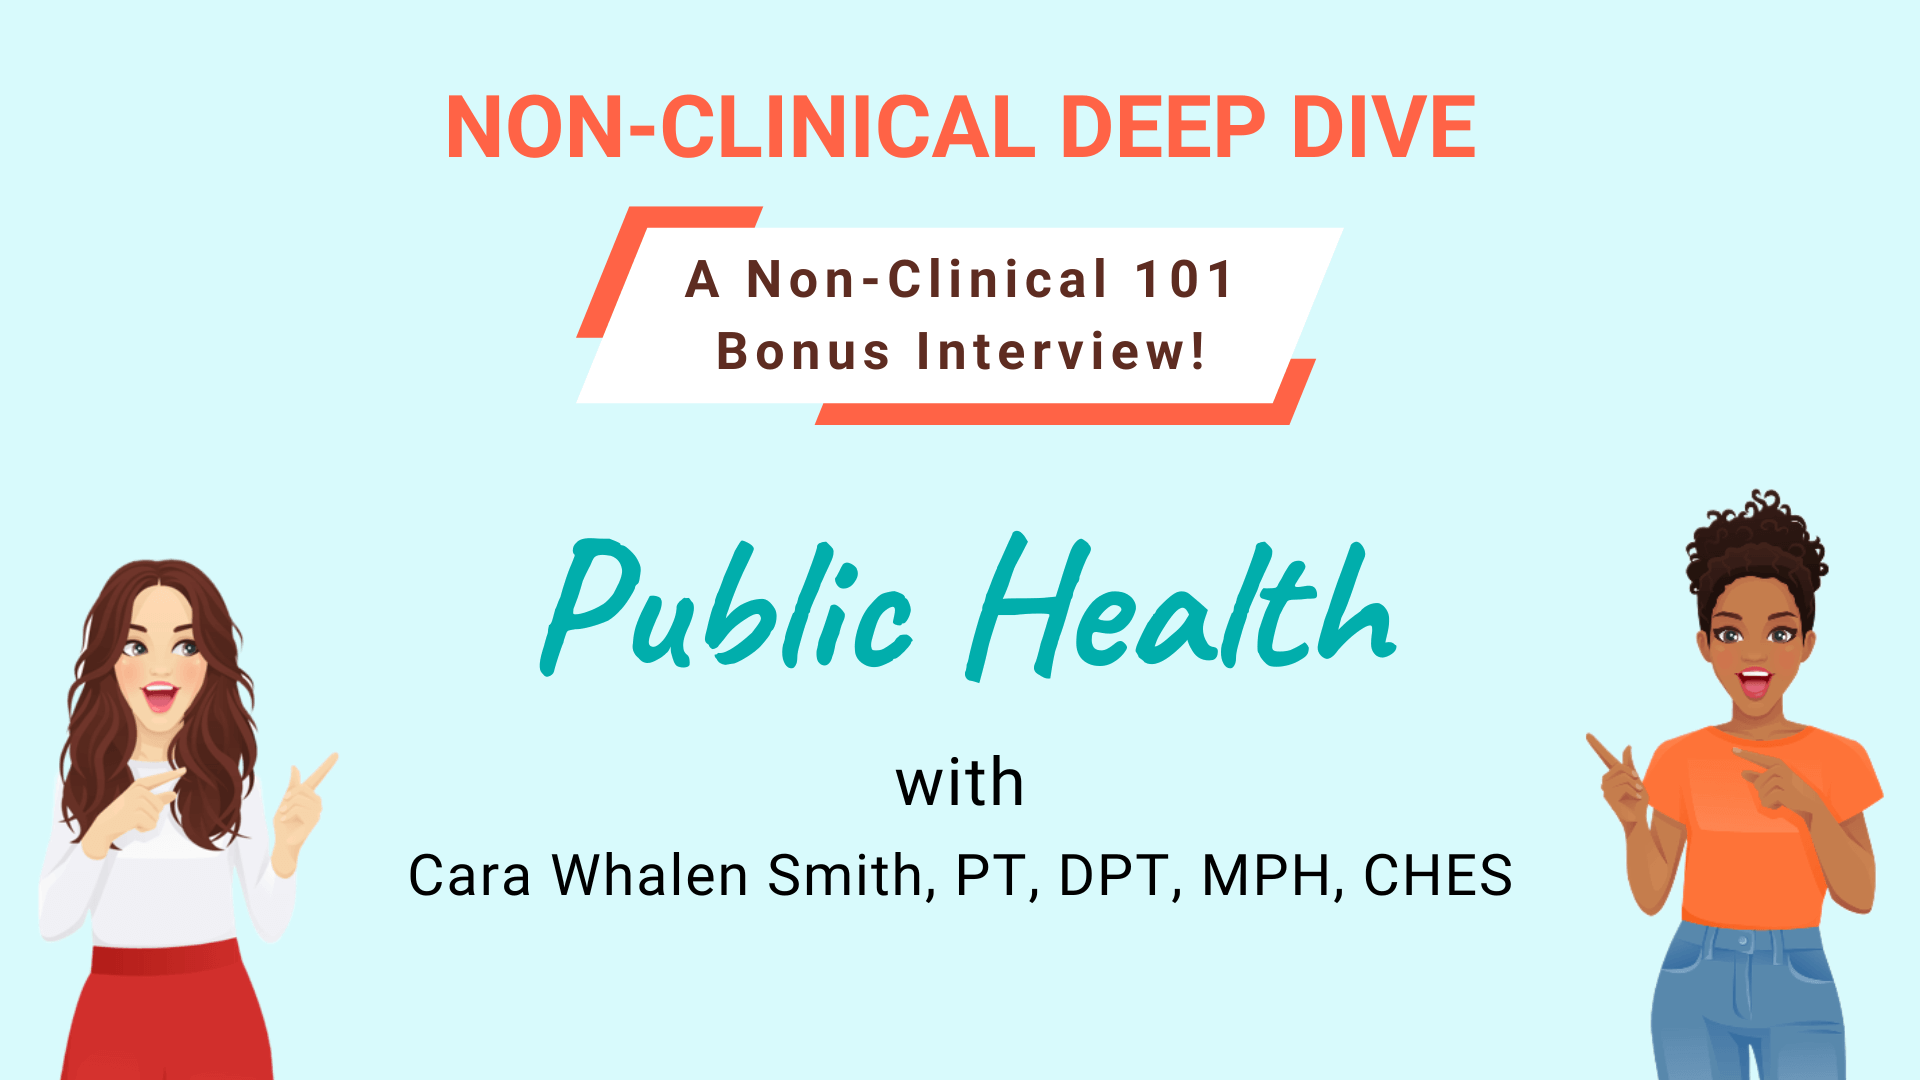 A non-clinical 101 bonus interview with Cara Whalen Smith, PT, DPT, MPH, CHES, on Public Health, is available in Non-Clinical 101!